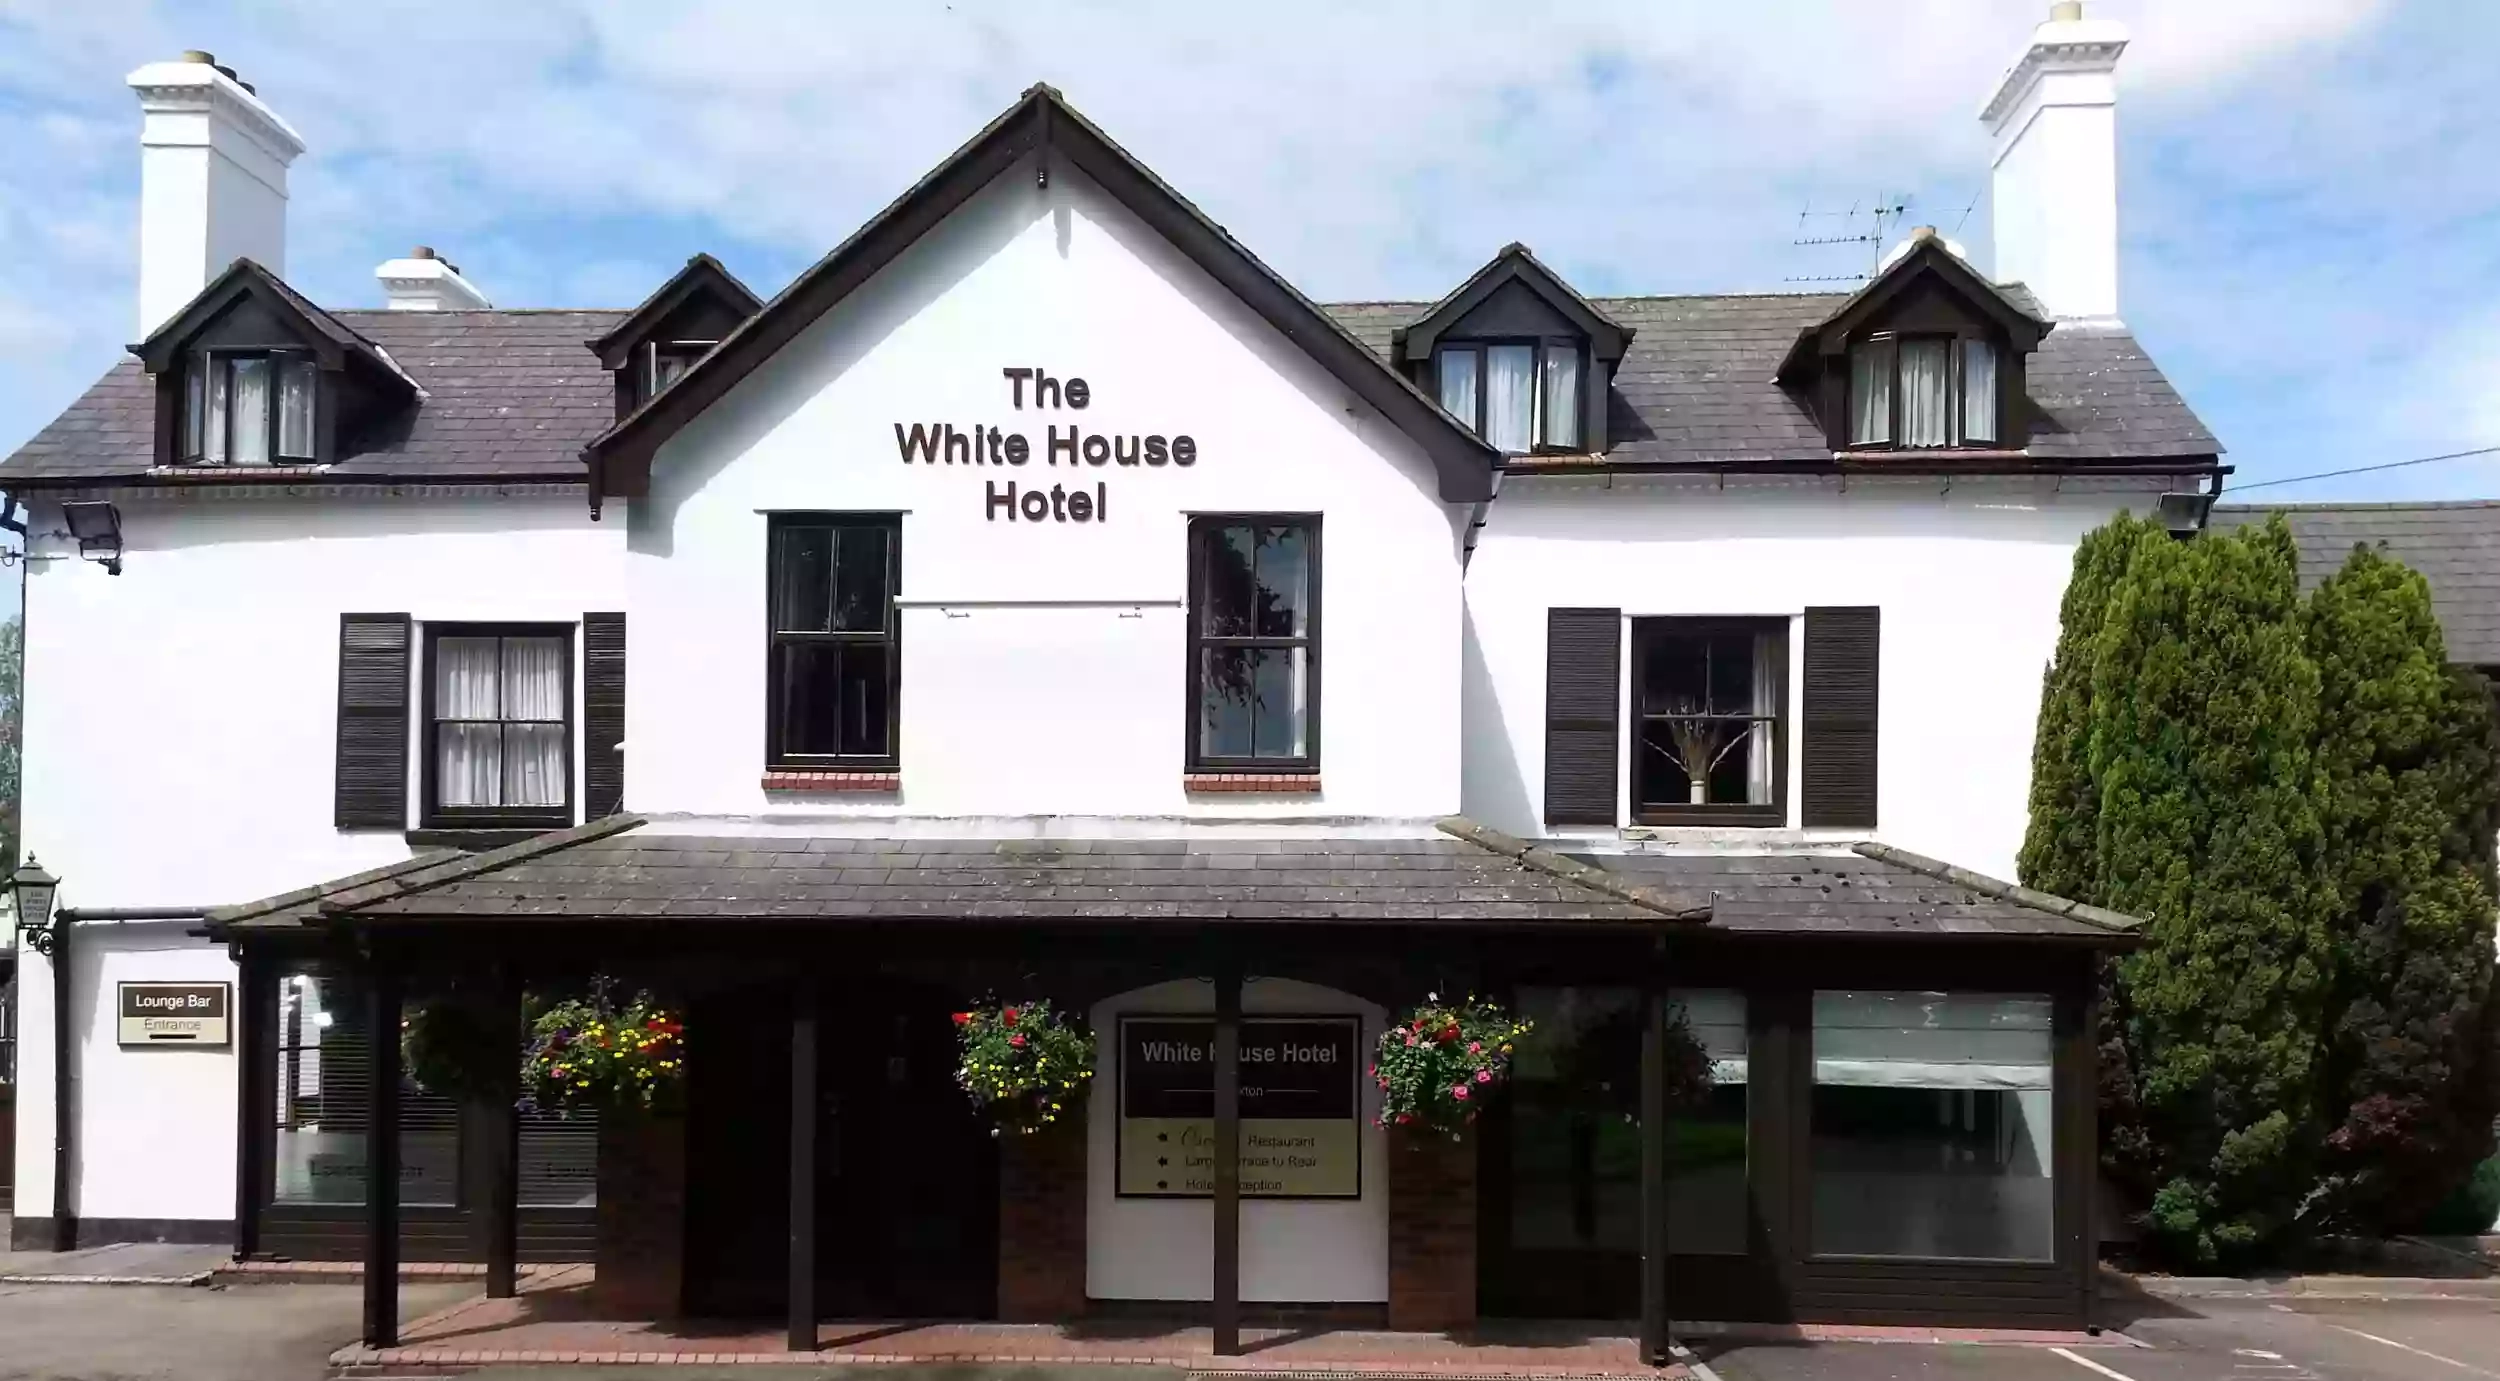 The White House Hotel